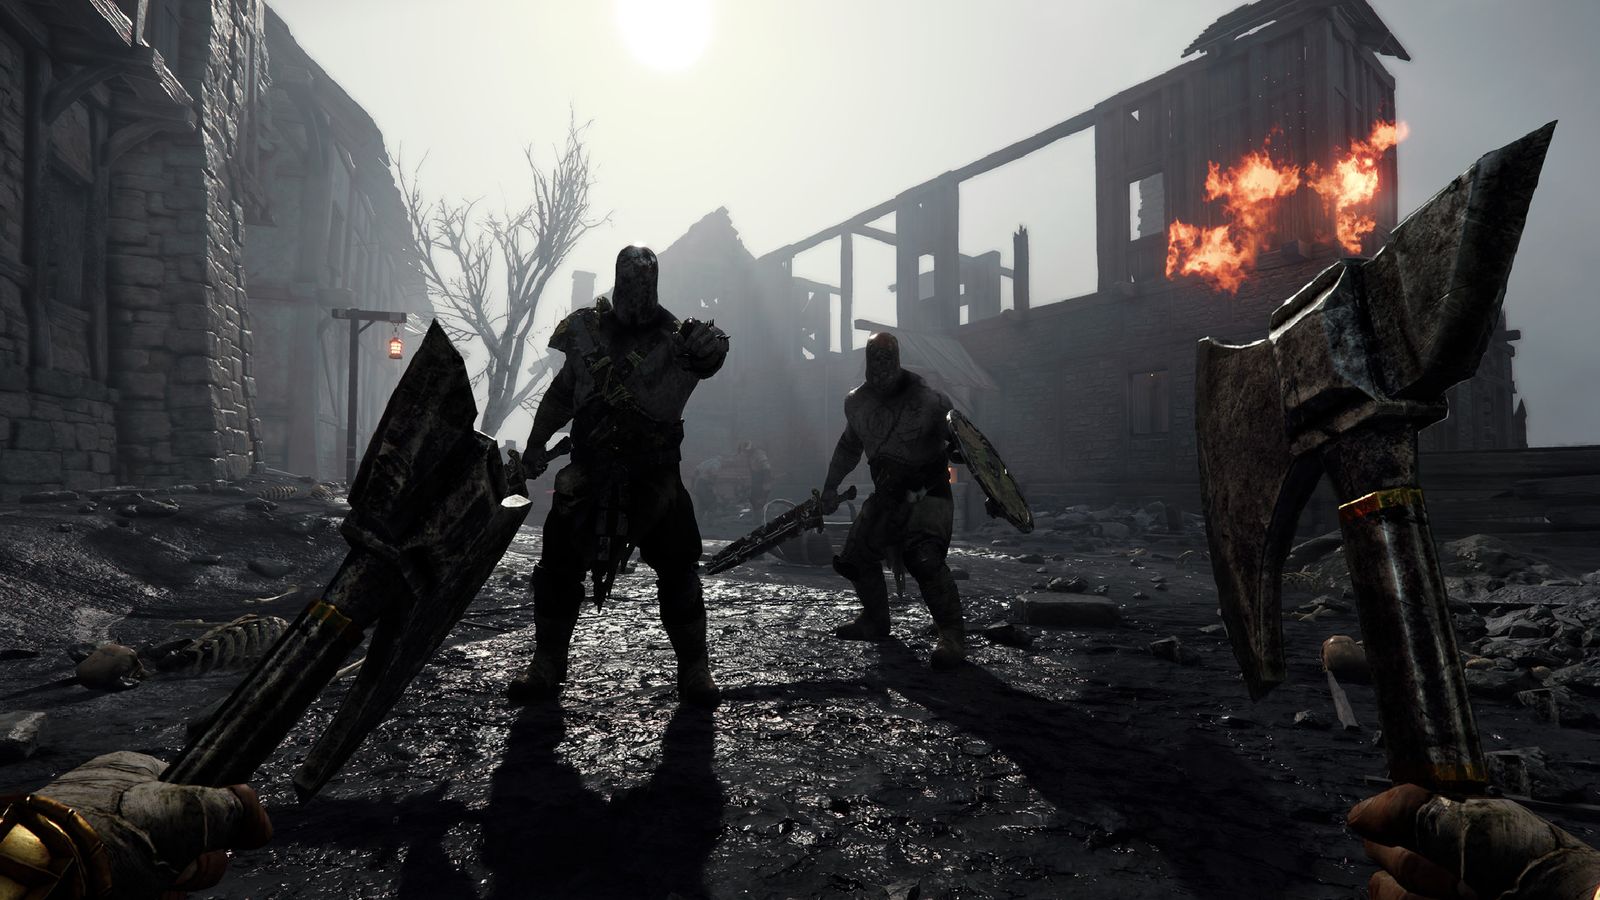 First-person in-game image from Warhammer: Vermintide 2 of a character weilding two axes fighting off enemies.